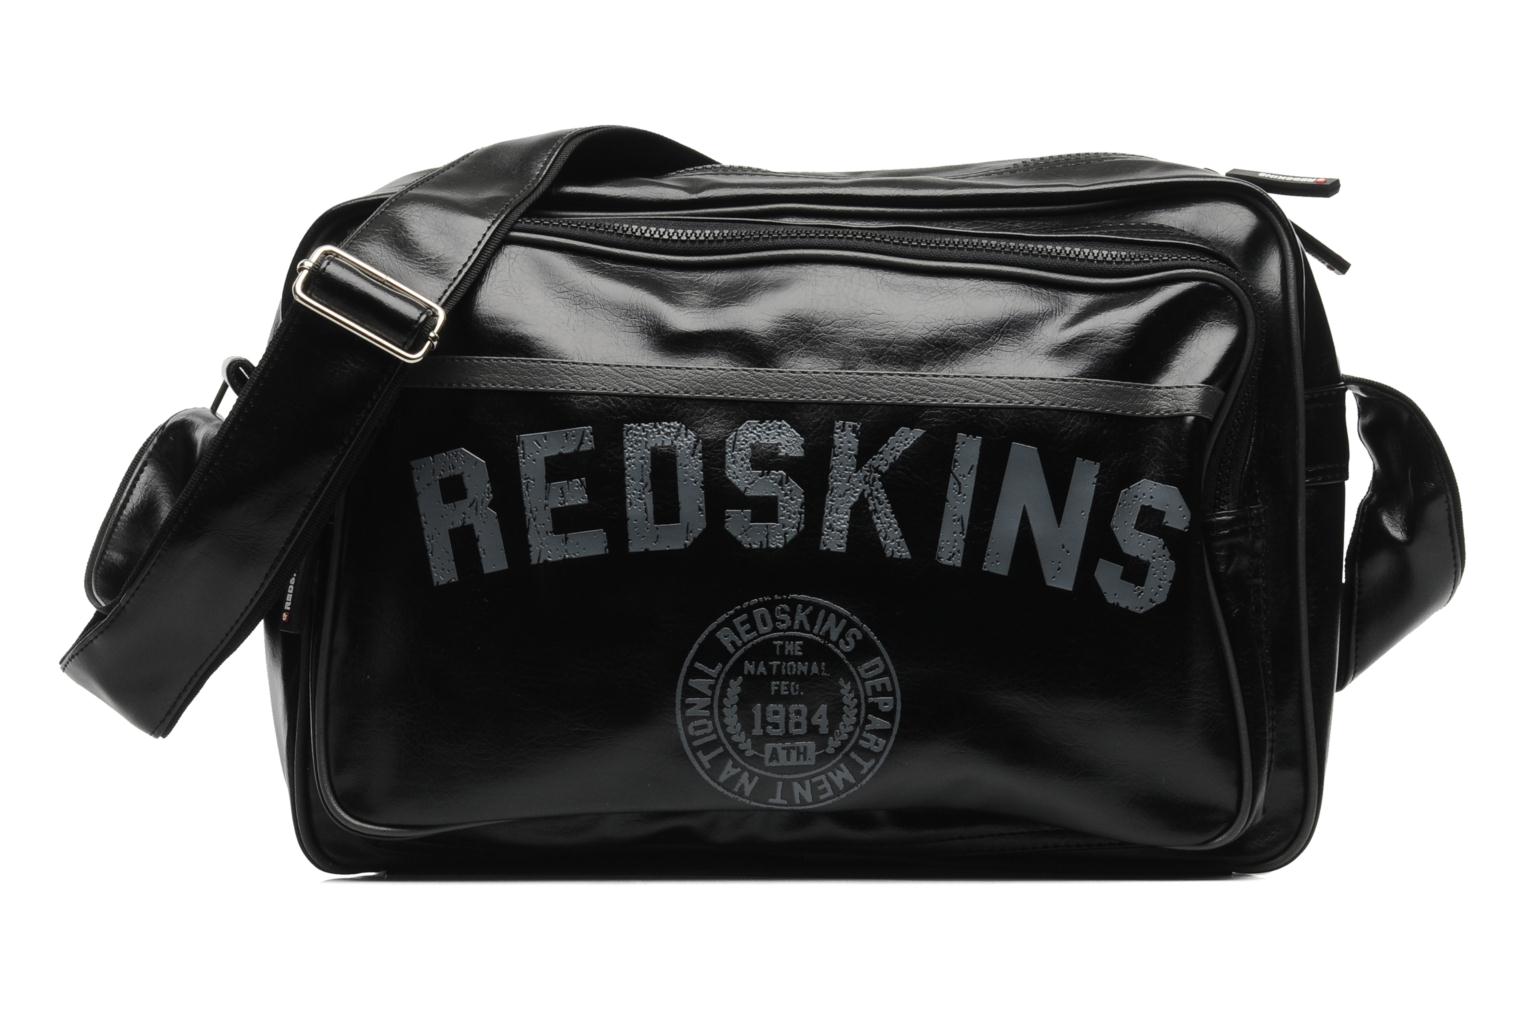 Foto City bags Redskins Airline besace A4 Bolsos y complementos